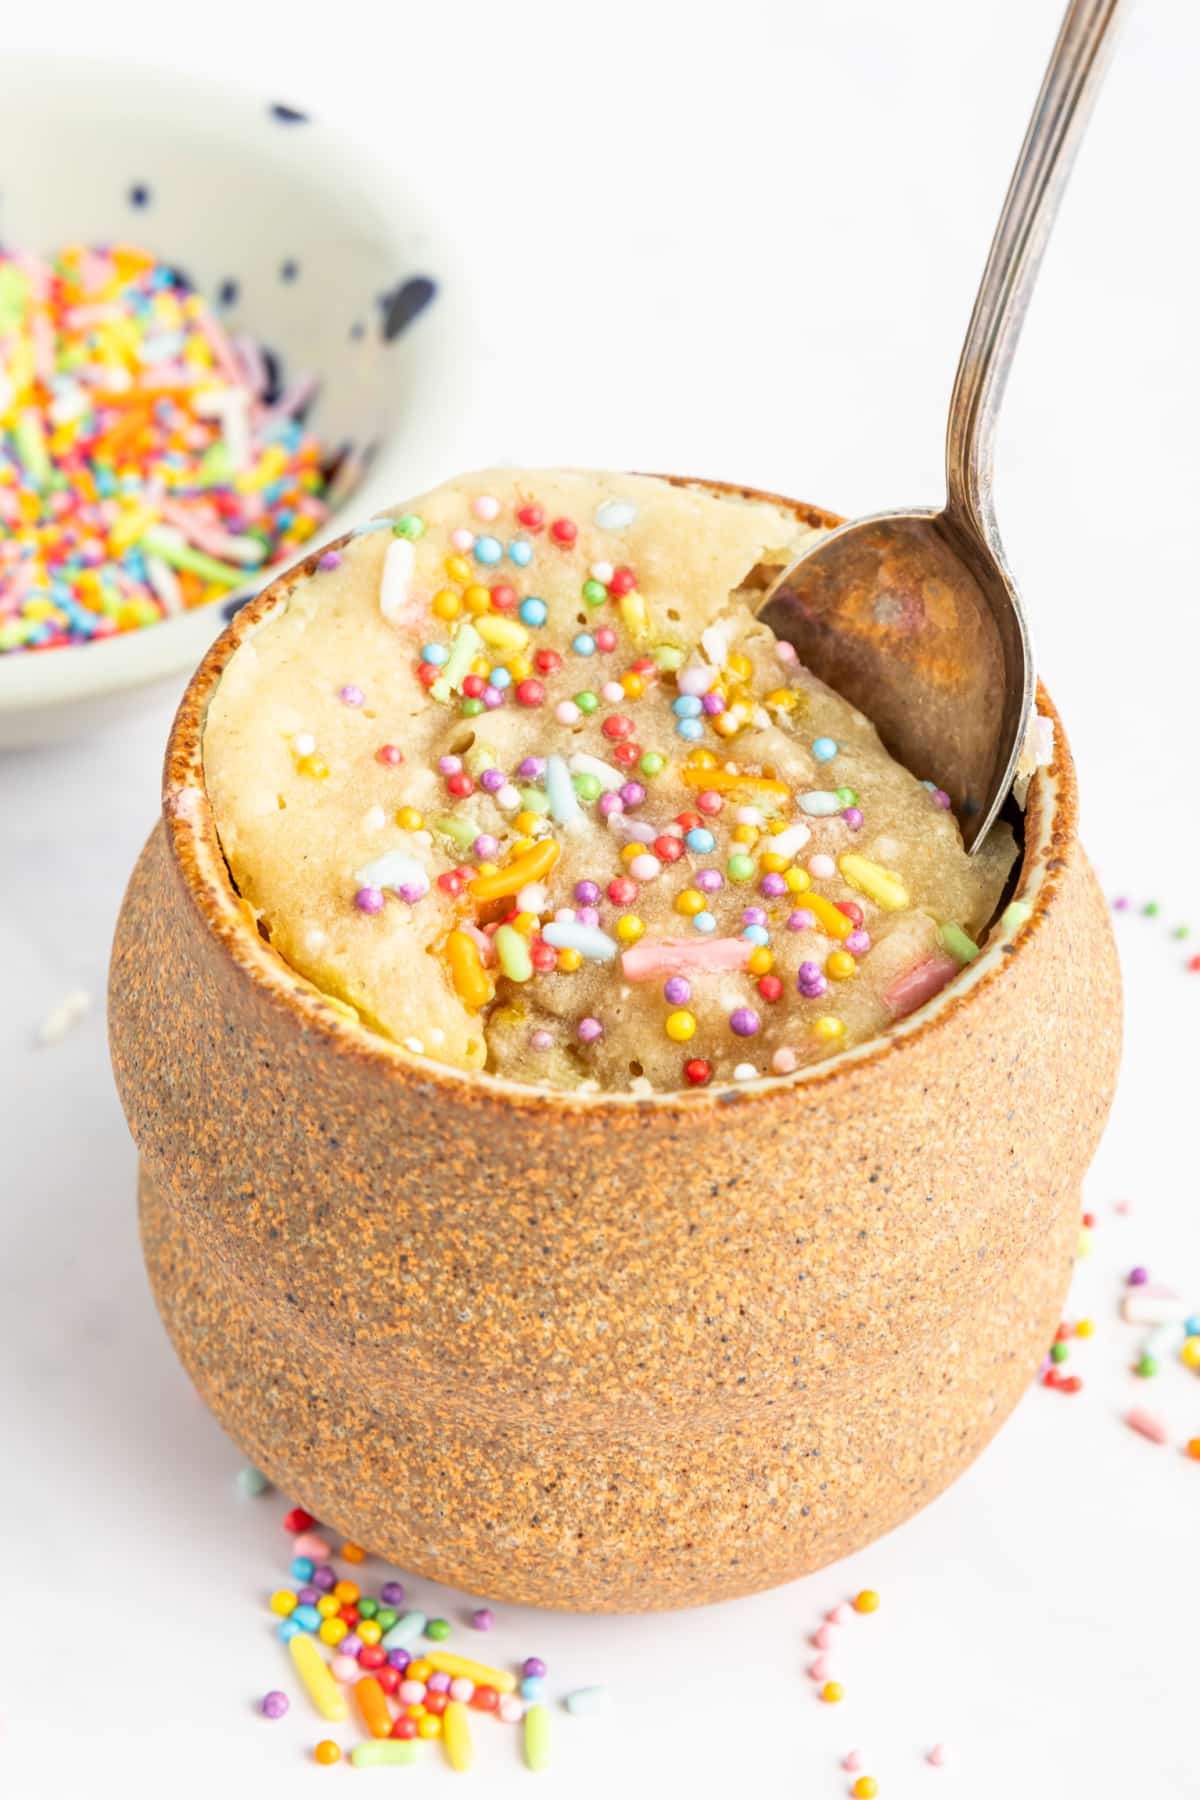 A spoon sits in a vanilla mug cake in the light brown pottery mug it was cooked in. Cake is yellow with sprinkles.